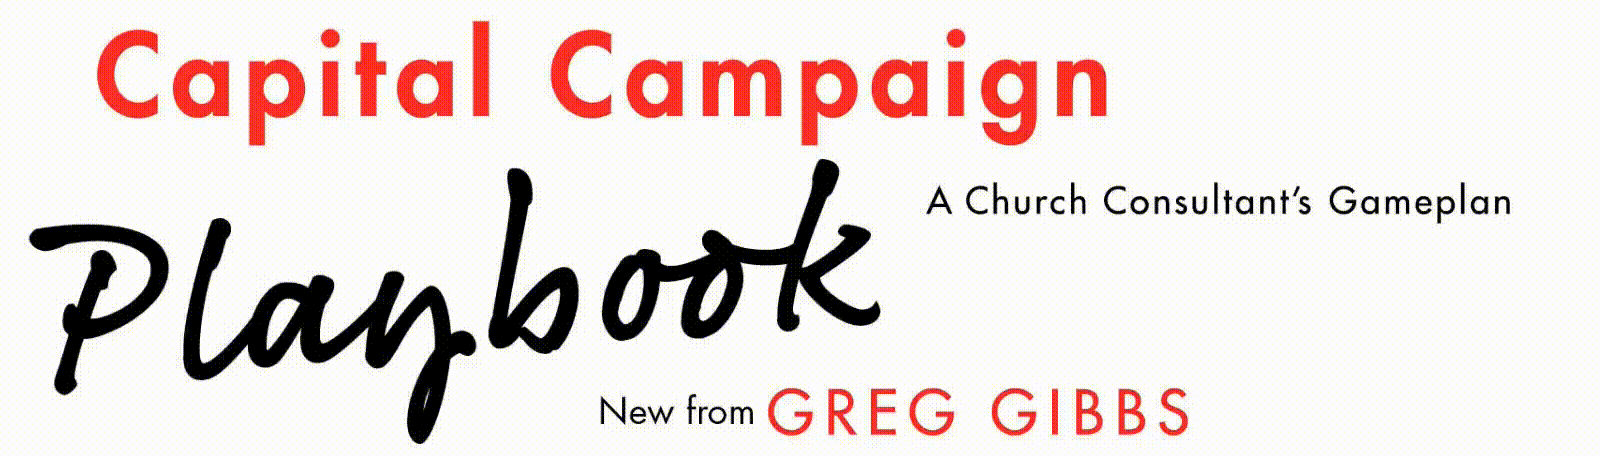 Capital Campaign Playbook: A Church Consultant's Gameplan. New from Greg Gibbs